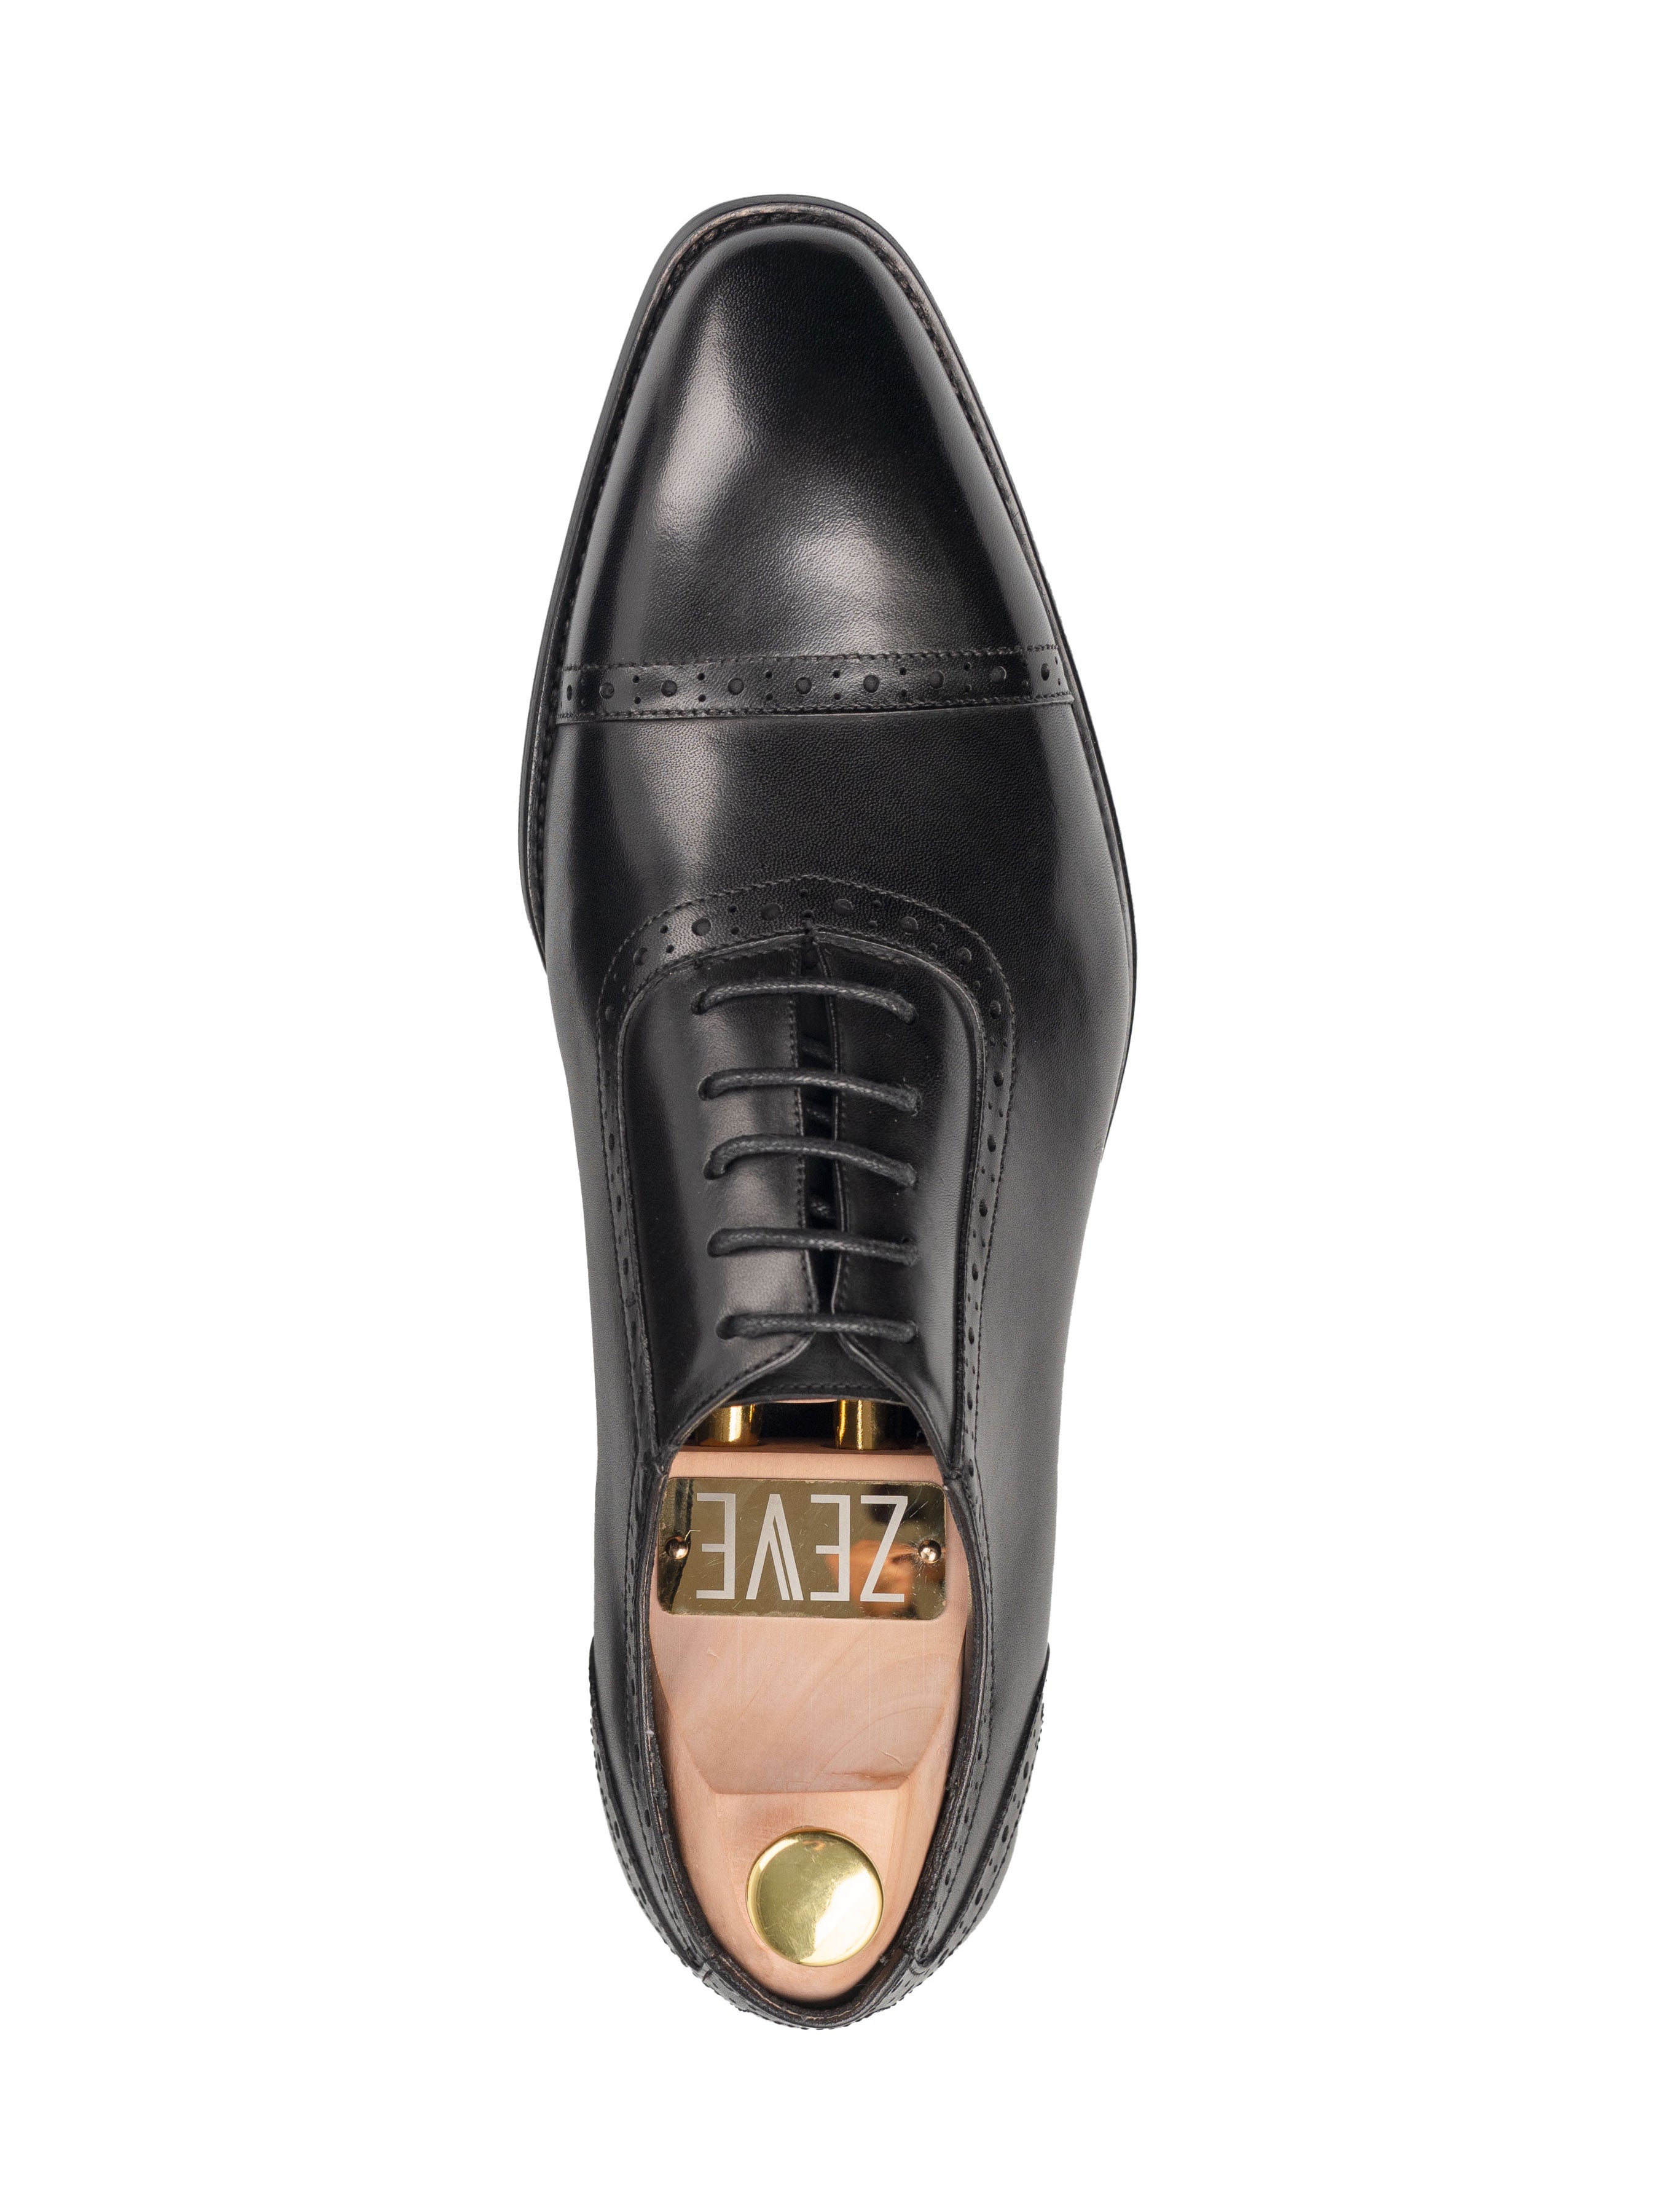 Oxford Cap Toe Adelaide - Black Lace Up (Chisel Toe)